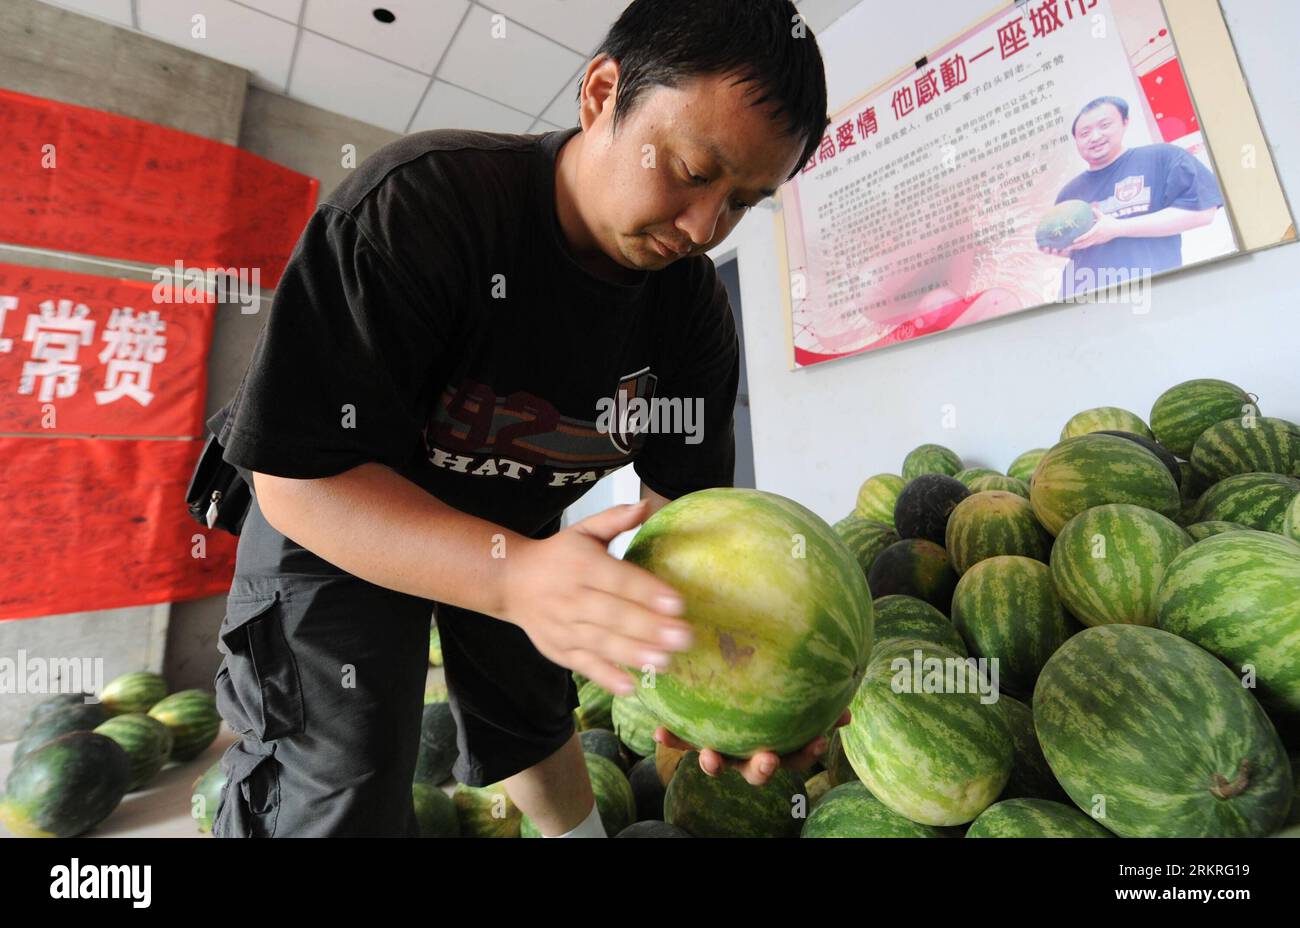 Bildnummer: 58240464  Datum: 10.07.2012  Copyright: imago/Xinhua (120713) -- ZHENGZHOU, July 13, 2012 (Xinhua) -- Chang Zan picks watermelon for his customer at the intersection of Nongye Road and Tianming Road in Zhengzhou, capital of central China s Henan Province, July 10, 2012. Chang raises money for his terminally ill wife s medical treatment by selling watermelons for five years. His story was widely spread among Chinese netizens recently. (Xinhua/Zhao Peng) (cl) CHINA-ZHENGZHOU-CHANG ZAN-WATERMELON (CN) PUBLICATIONxNOTxINxCHN Gesellschaft Verkauf Melone Wassermelone Pflege Frau krank x0 Stock Photo